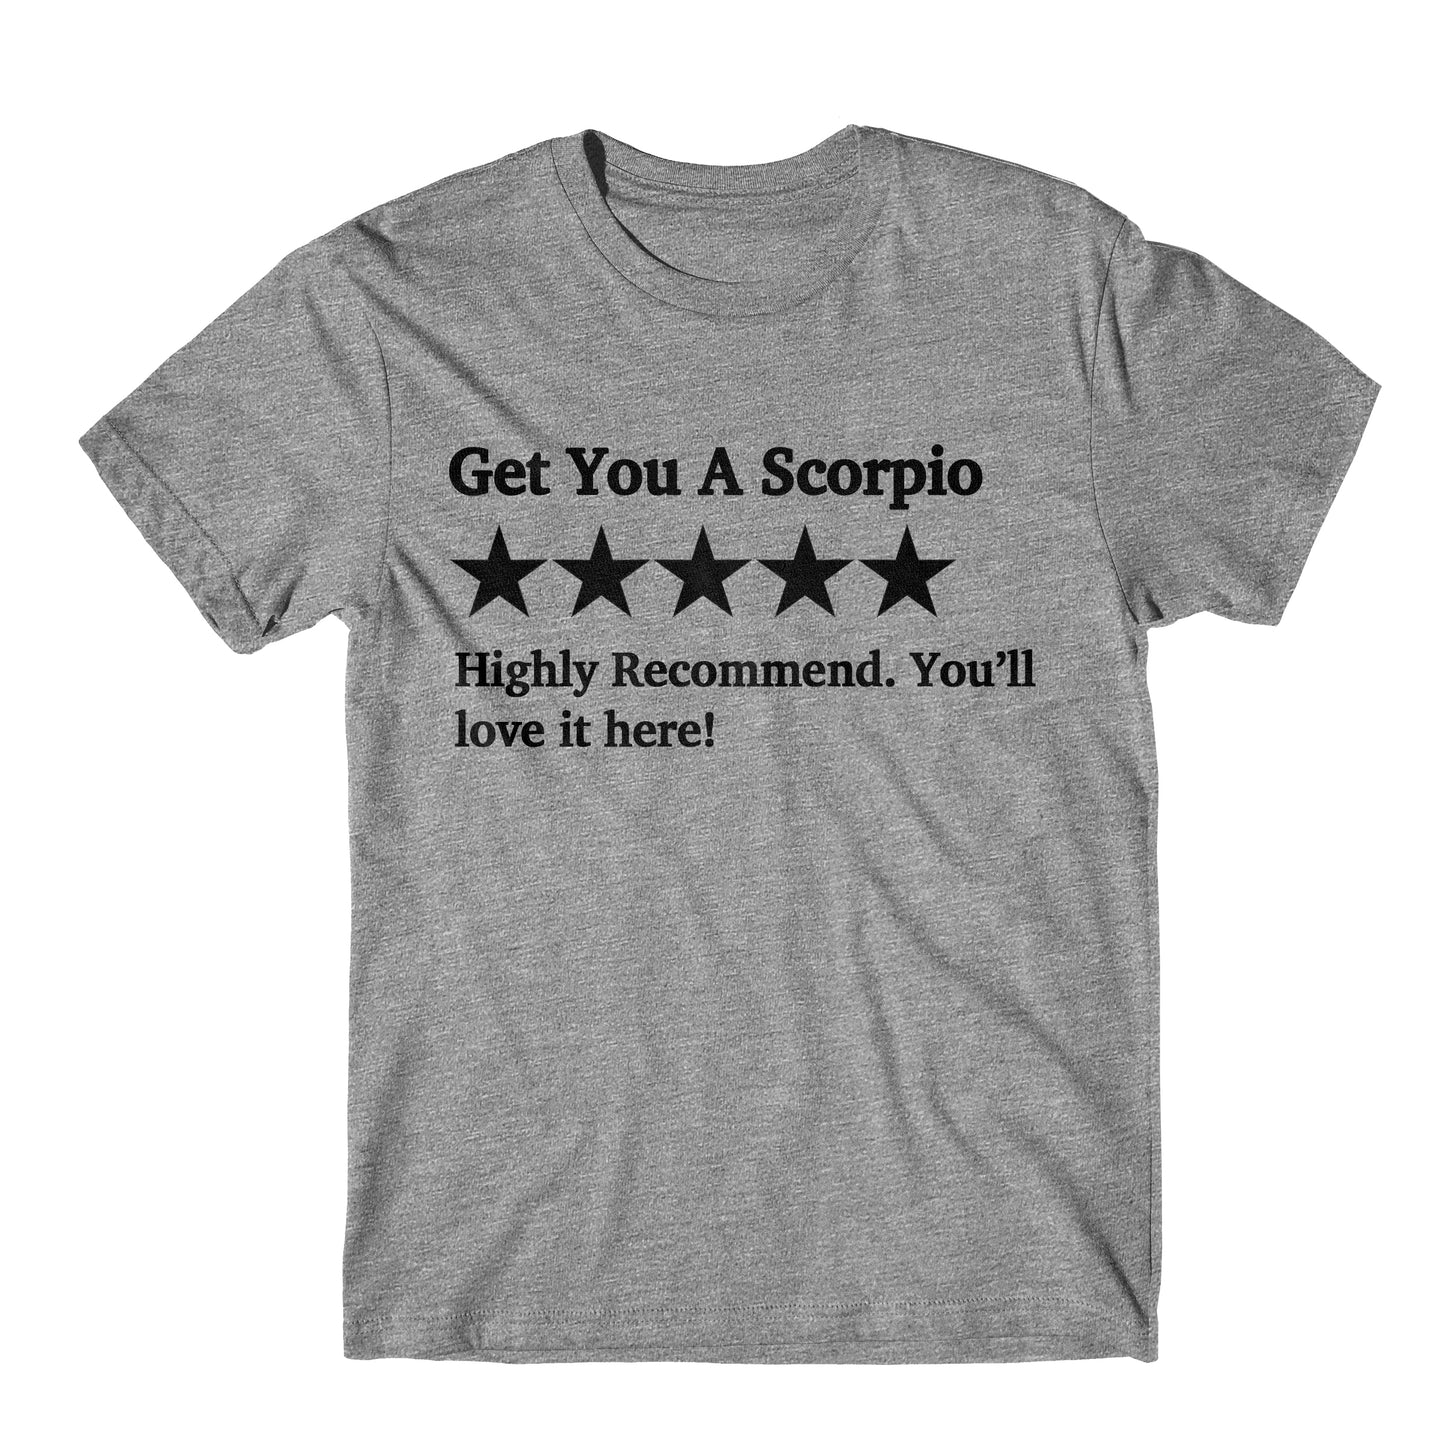 "Get You A Scorpio Five Star Rating" Tee